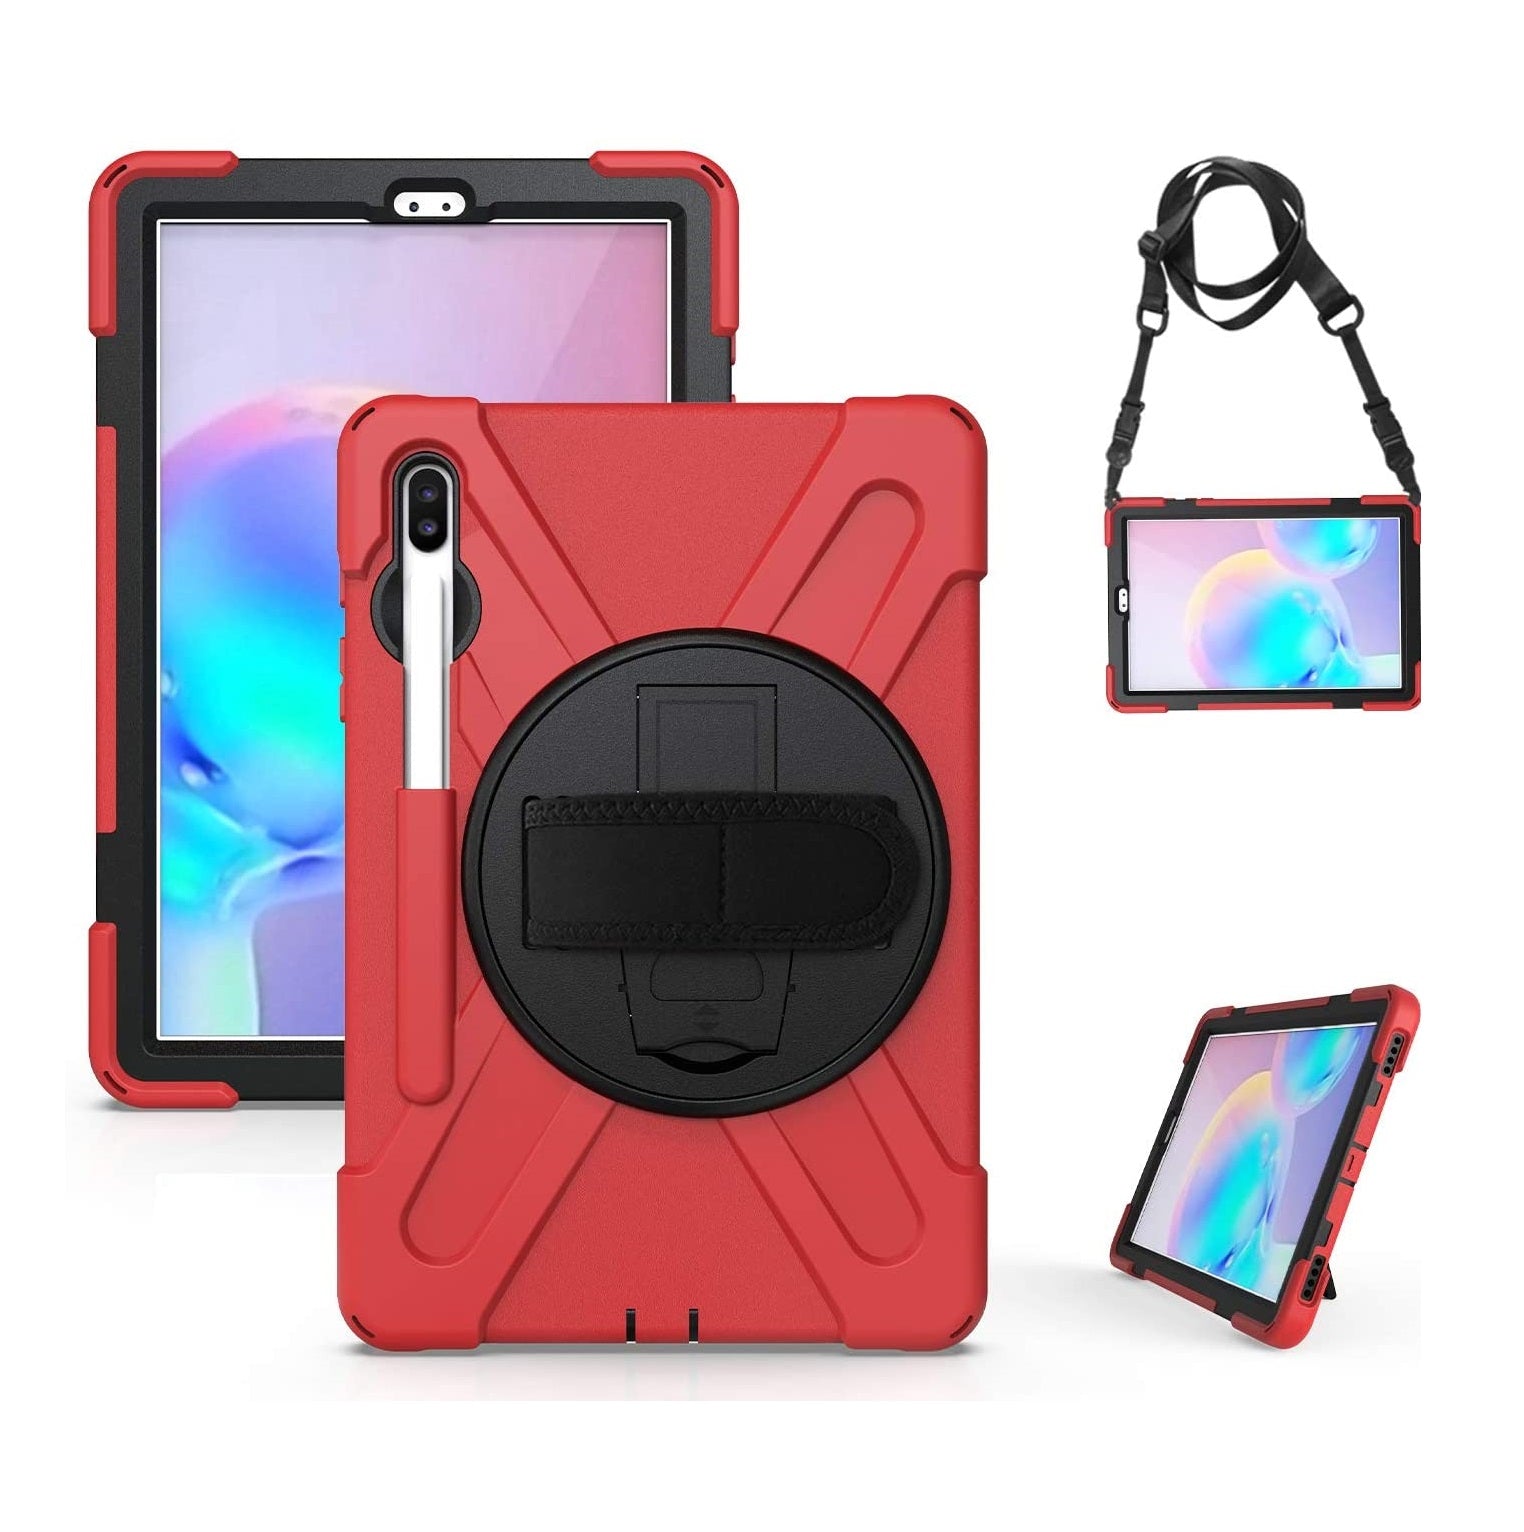 https://caserace.net/products/rugged-heavy-duty-cover-for-samsung-galaxy-tab-s6-t860-with-strap-and-pencil-holder-red